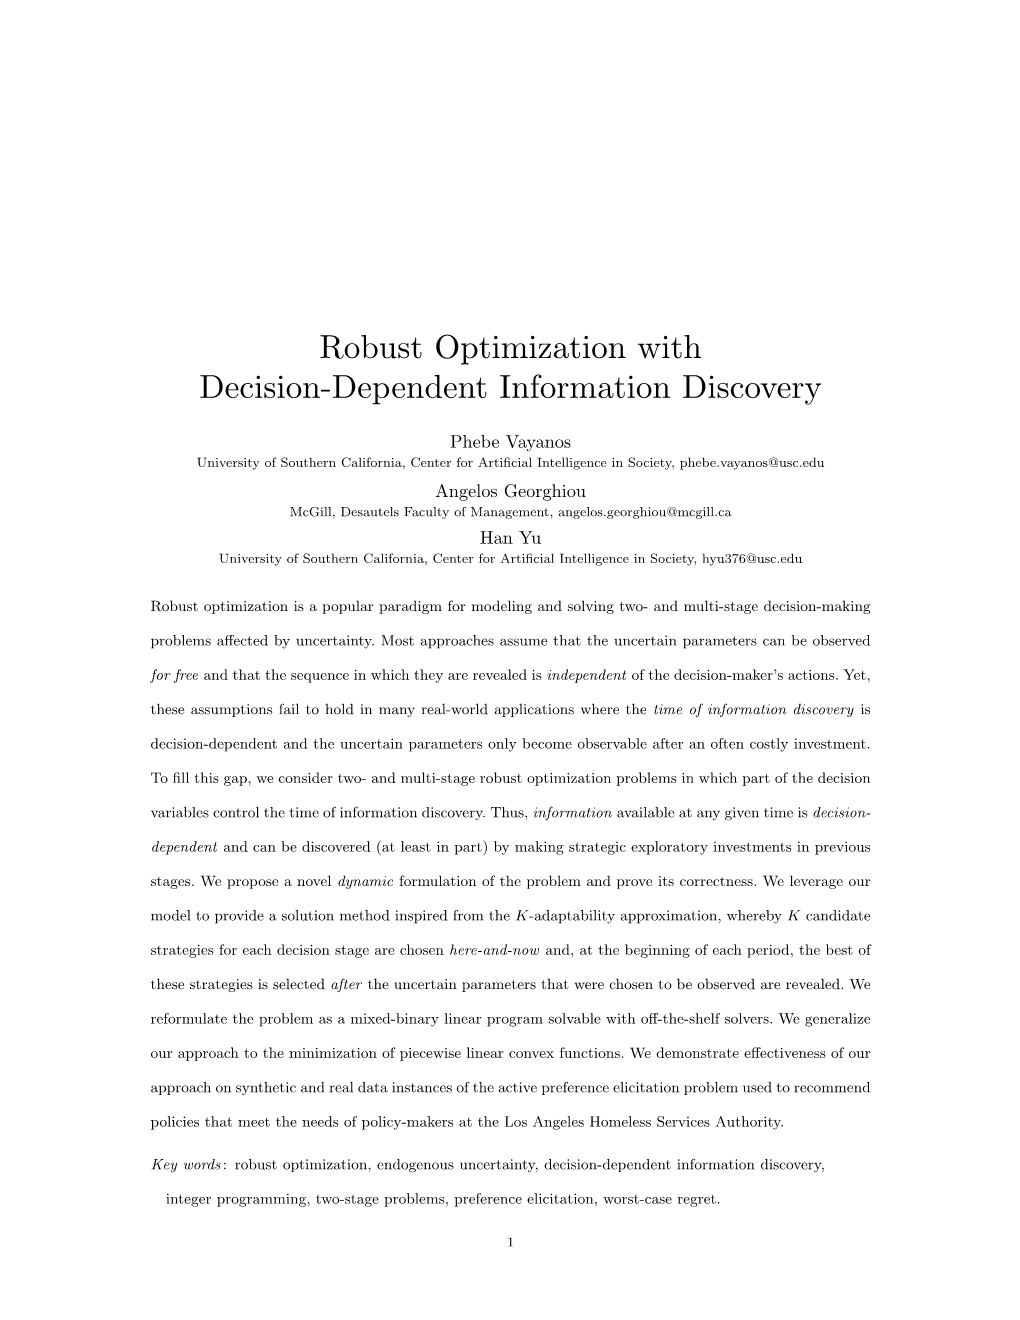 Robust Optimization with Decision-Dependent Information Discovery